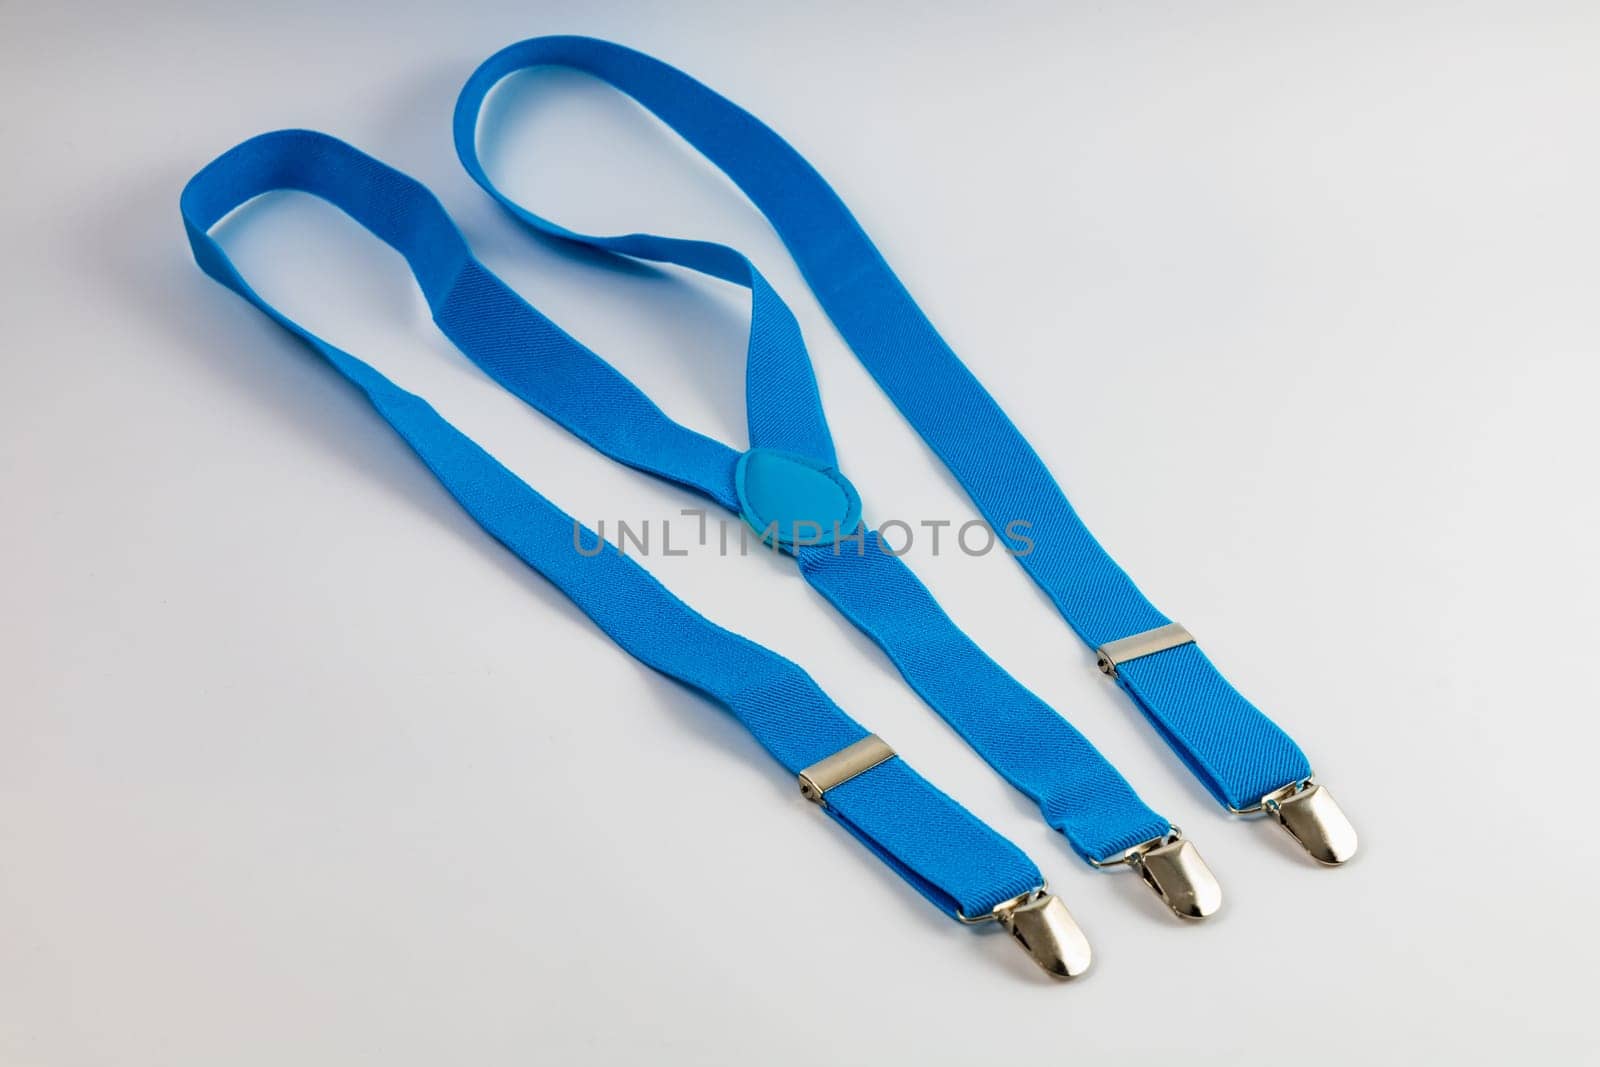 Small and blue trousers suspenders made of elastic fabric by Wierzchu